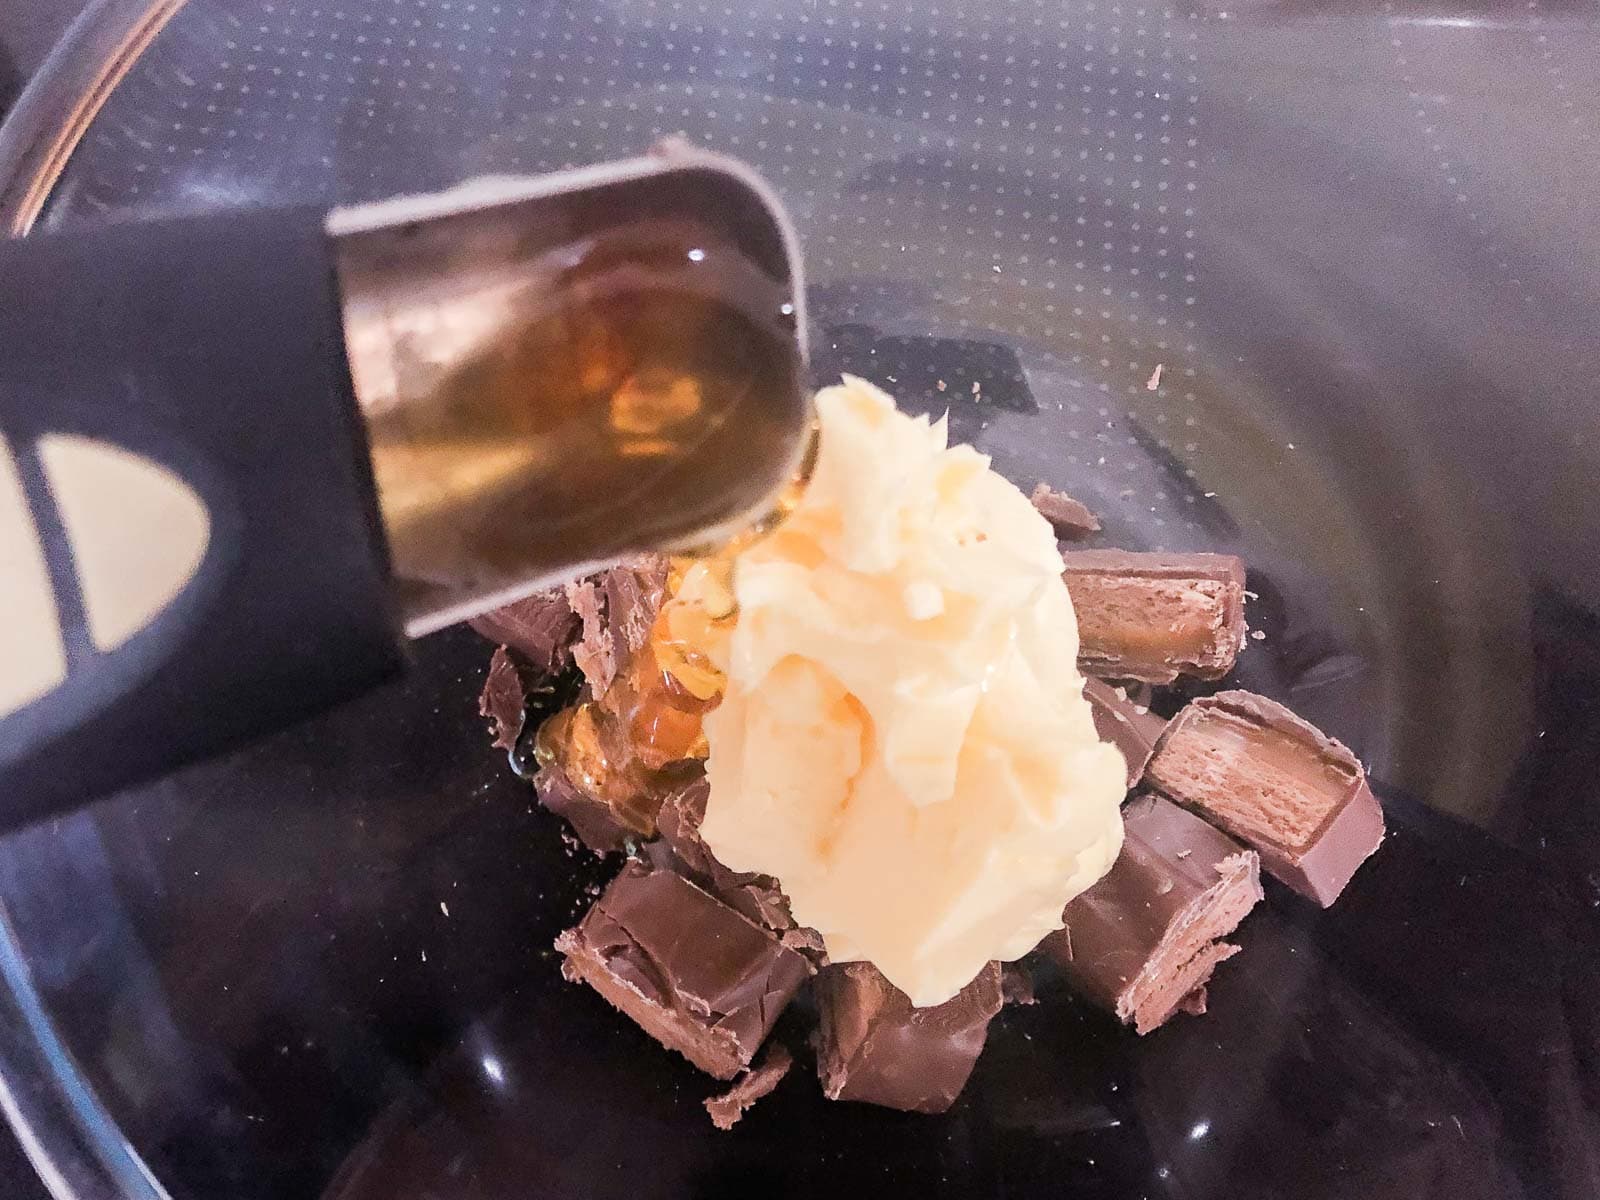 A glass bowl over a pan of simmering water containing mars bars cut into pieces, some butter and a measuring spoon about to add some golden syrup.